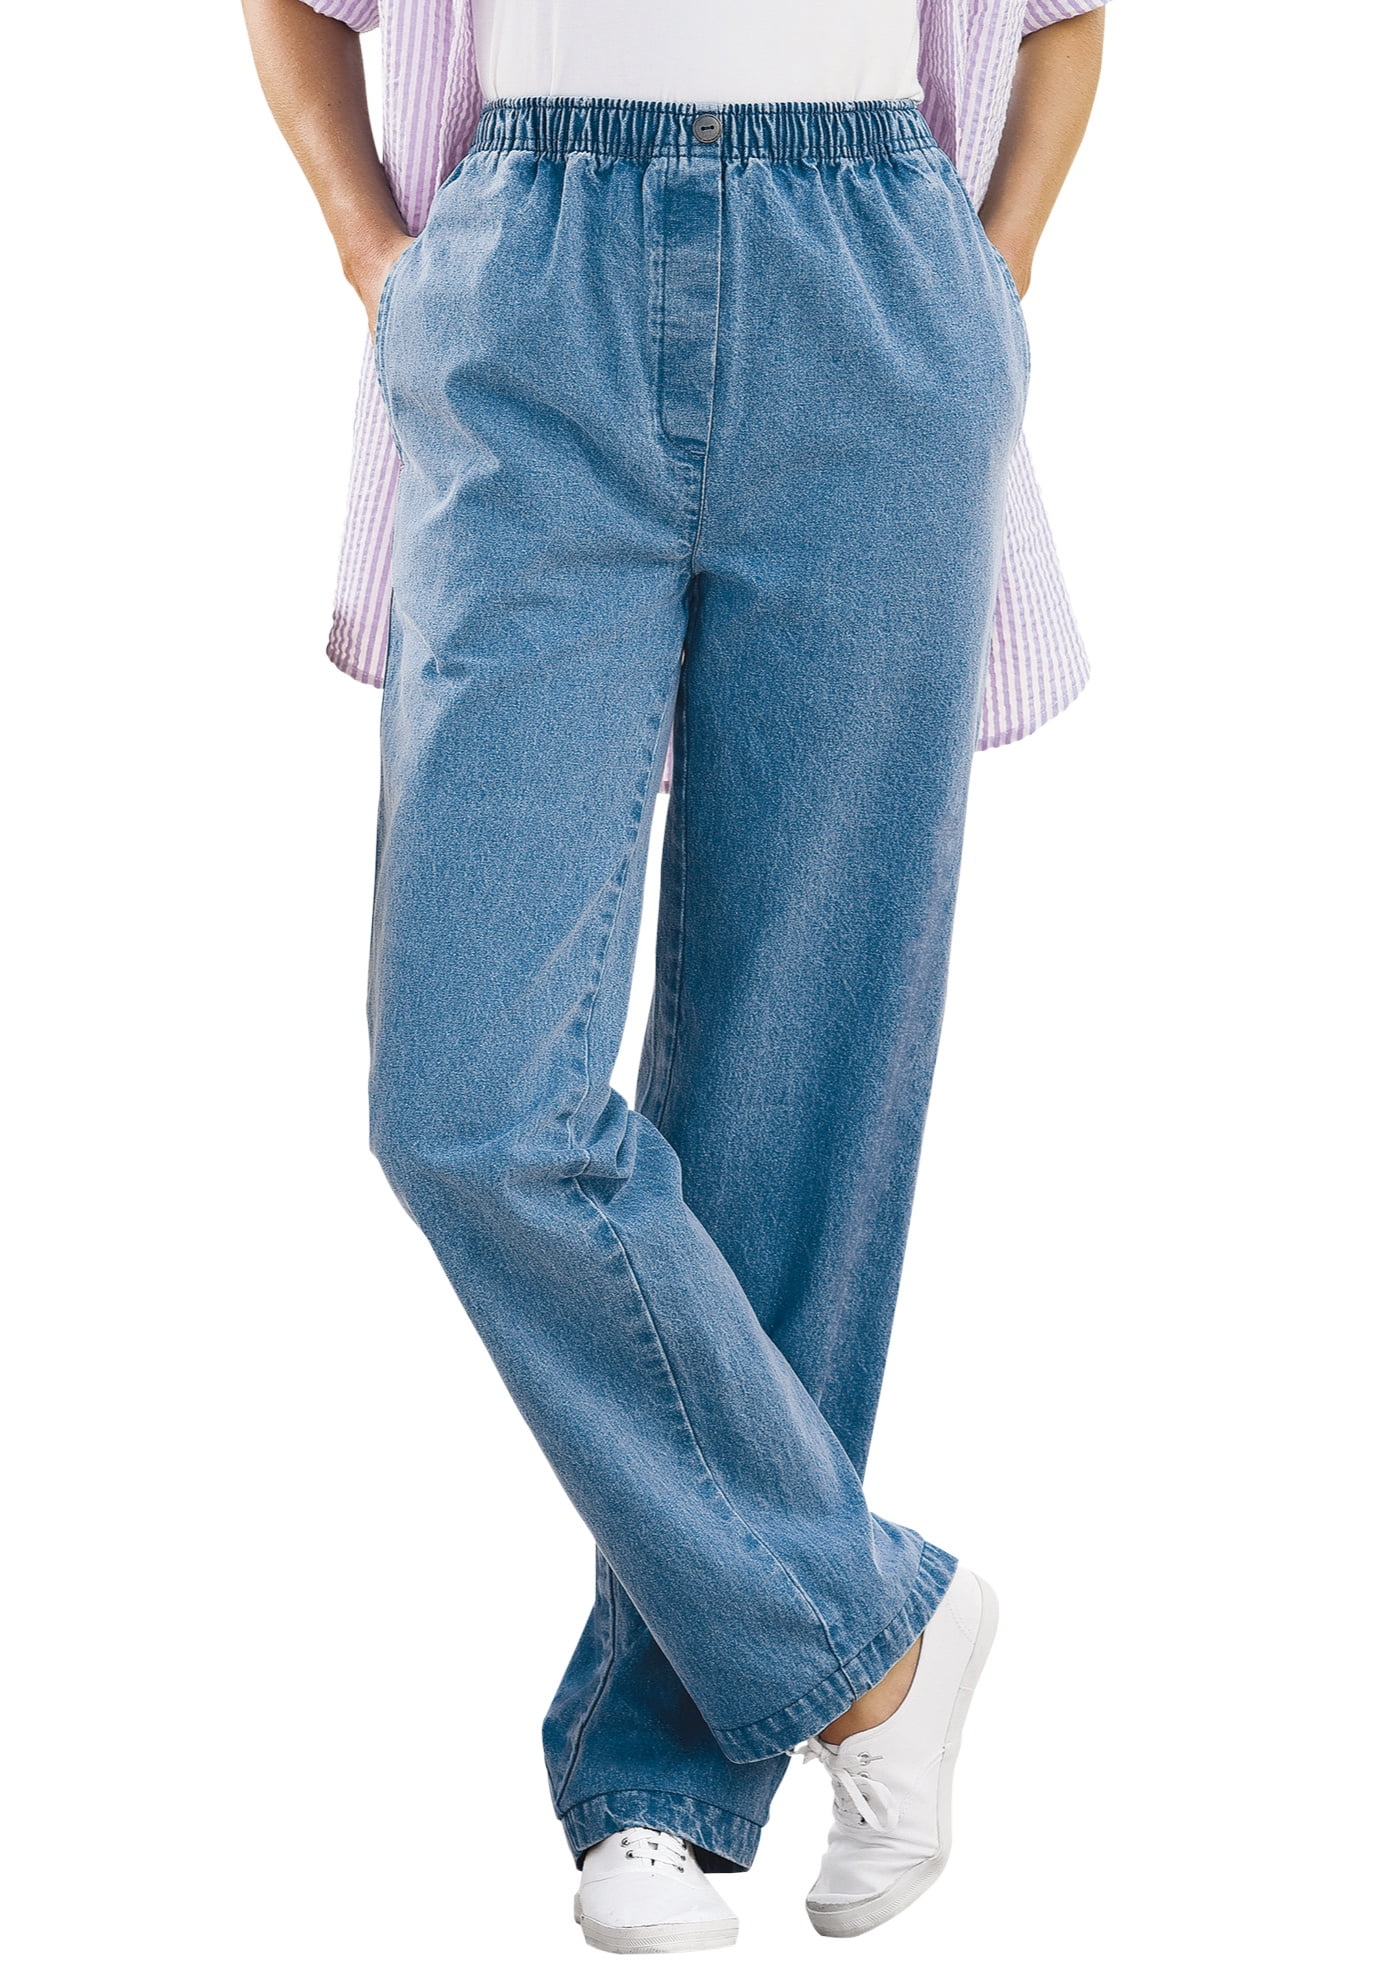 WOMAN WITHIN Womens Plus Size Jeans Cotton Stretch Straight Leg Pant Relaxed Fit